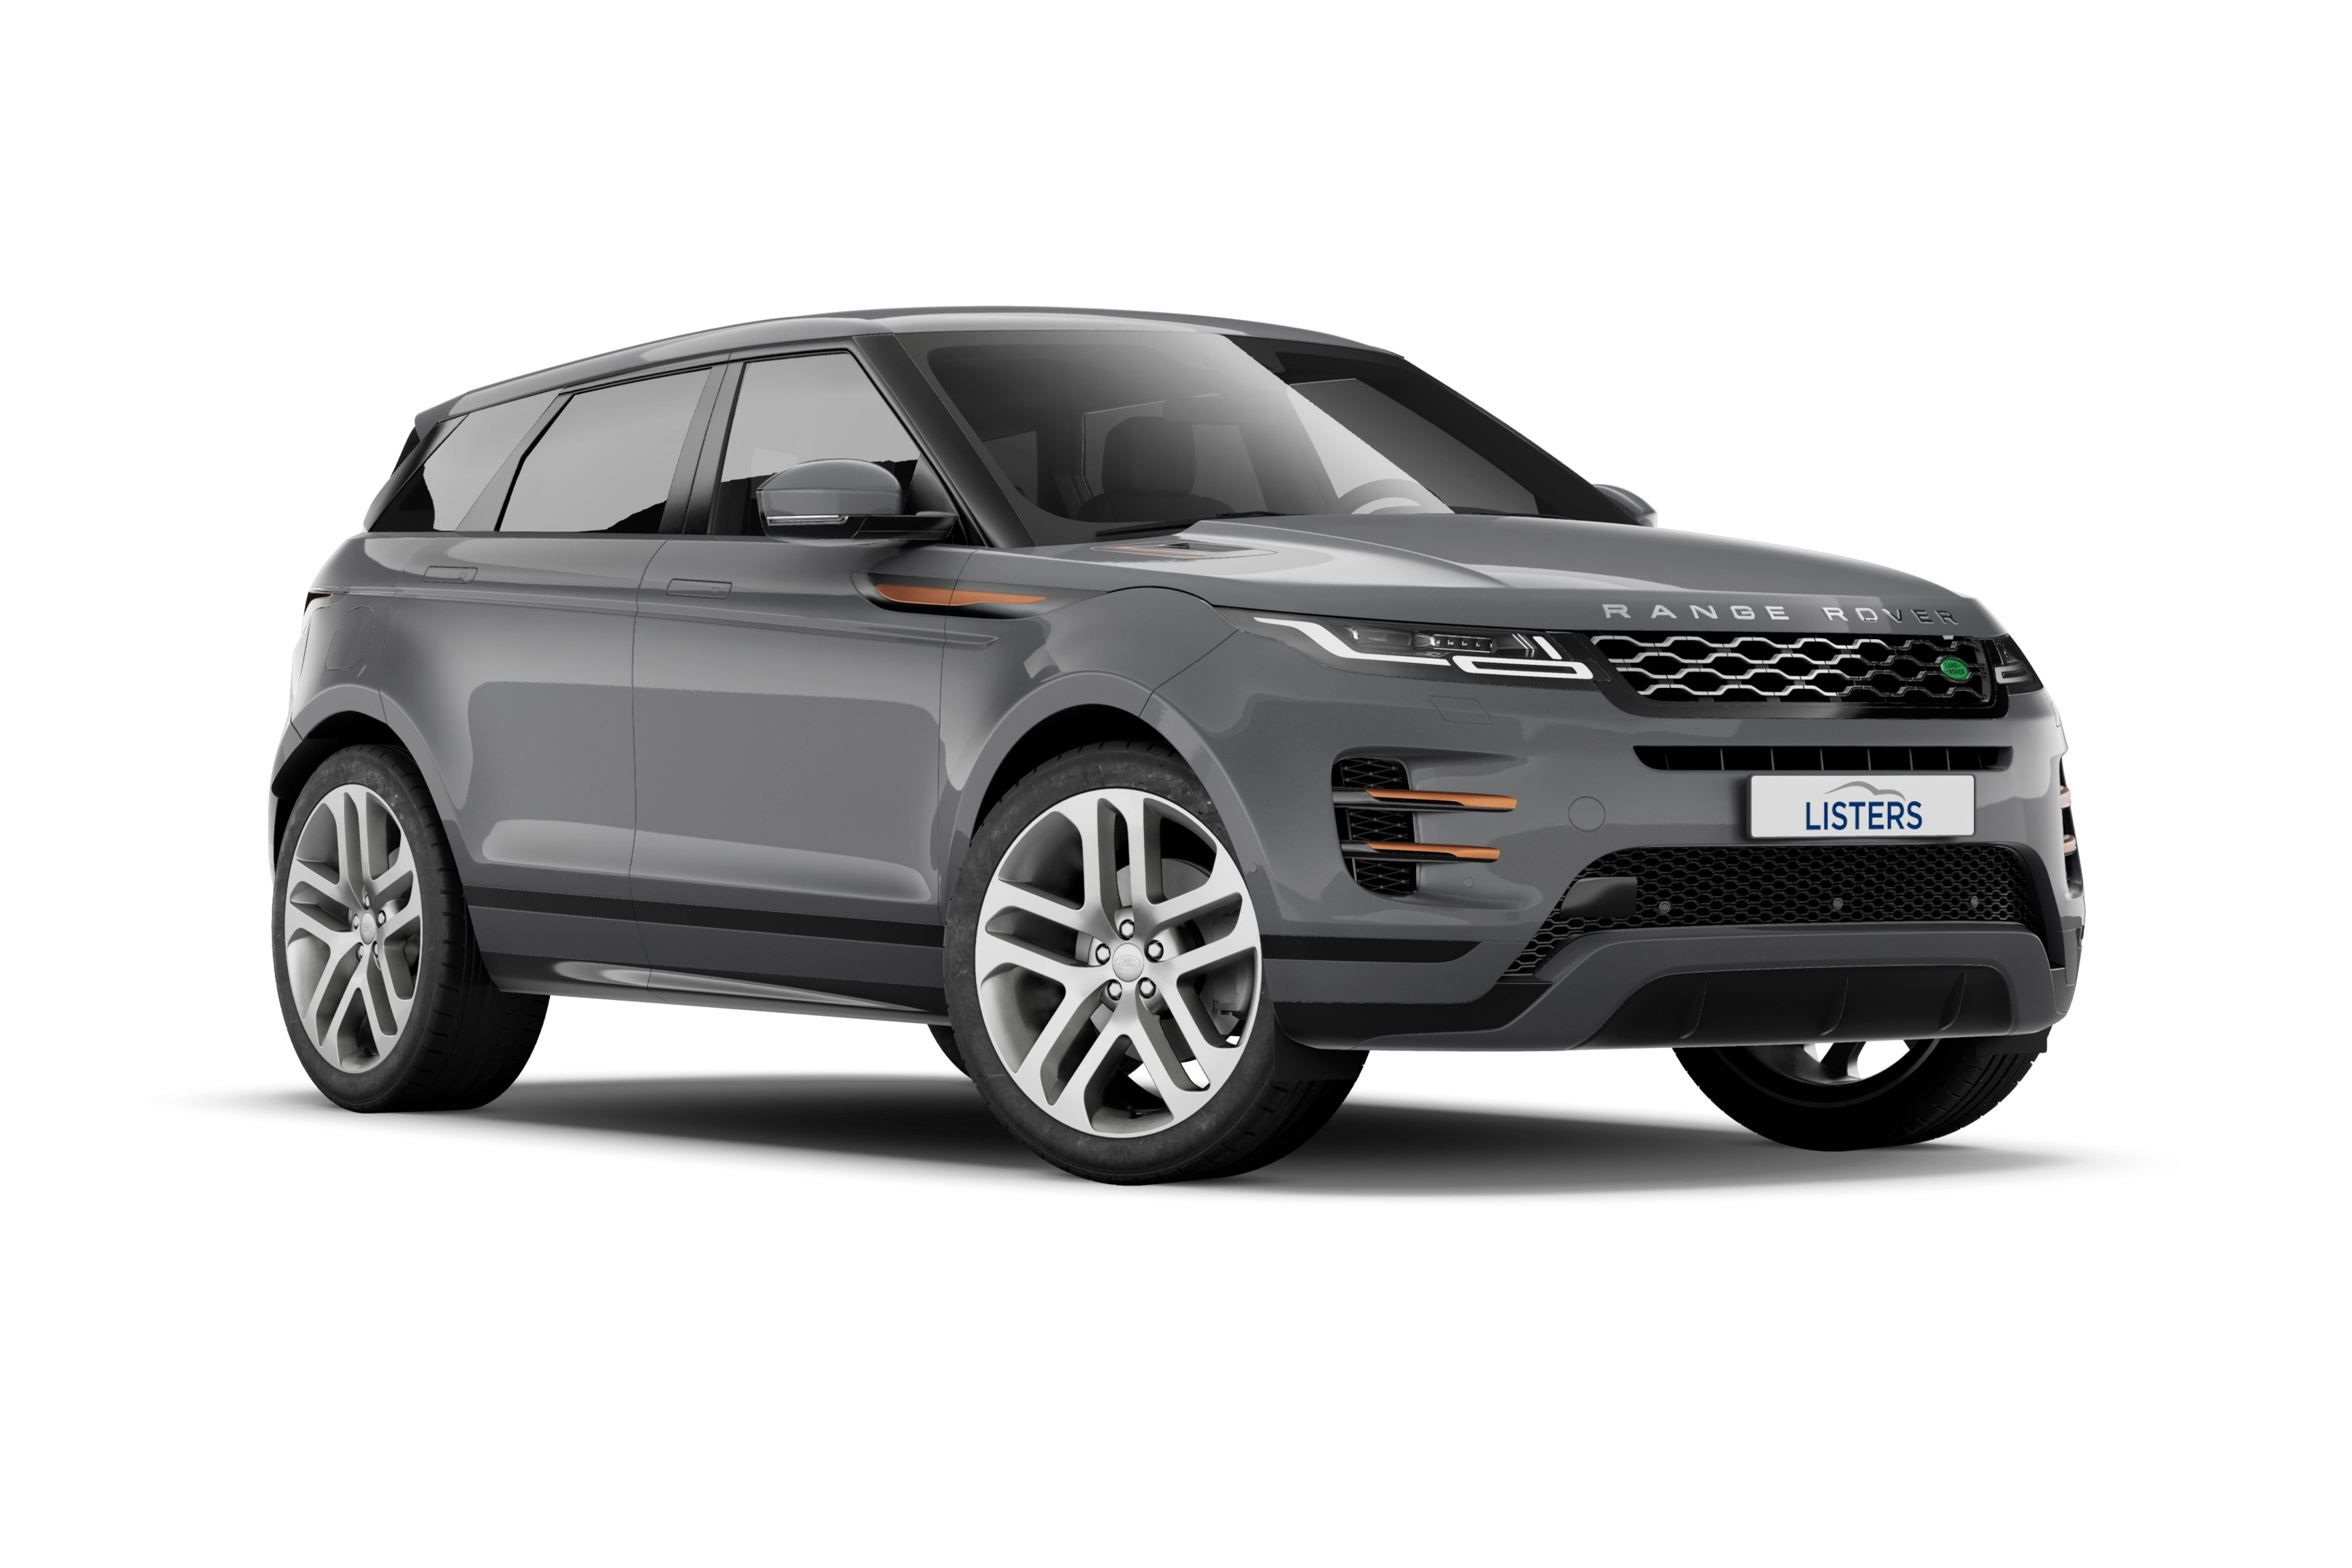 Range Rover Evoque Contract Hire & Leasing Offers